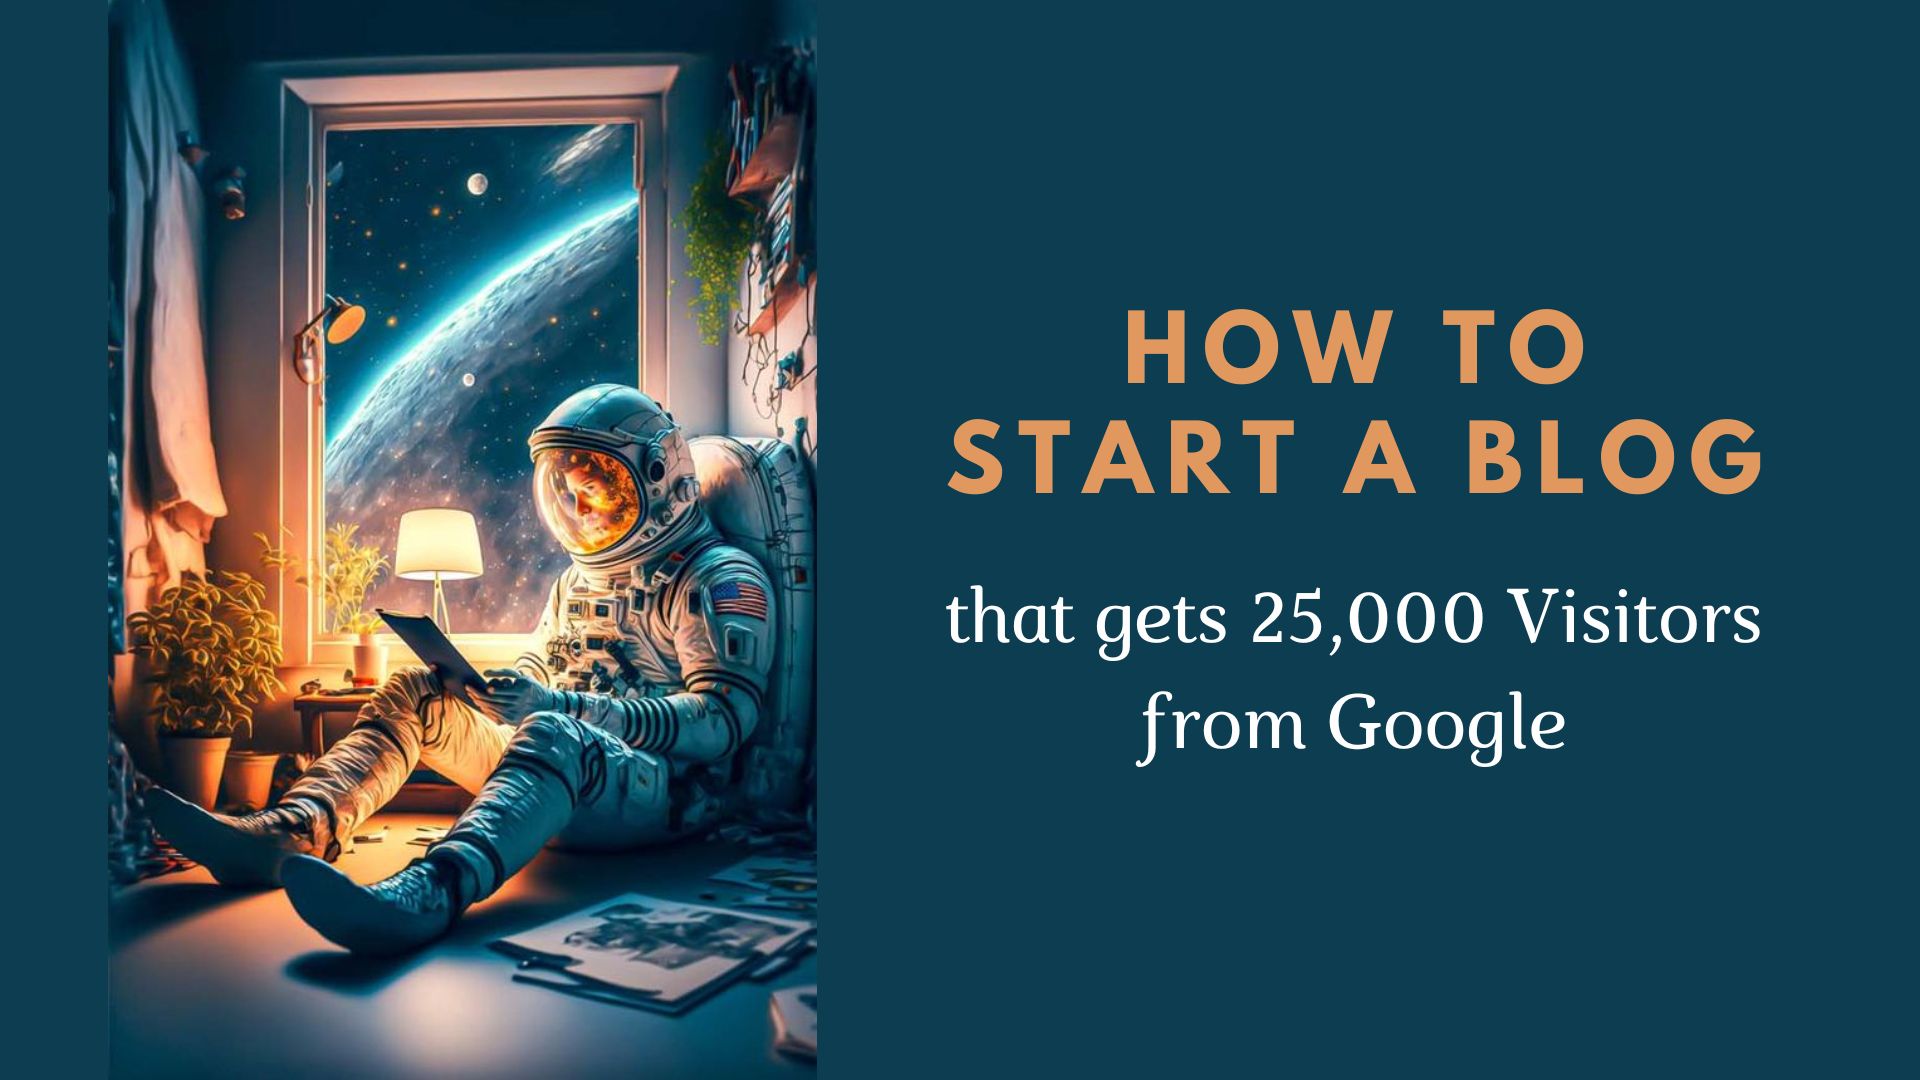 How to Start a blog that gets 25,000 Visitors from Google